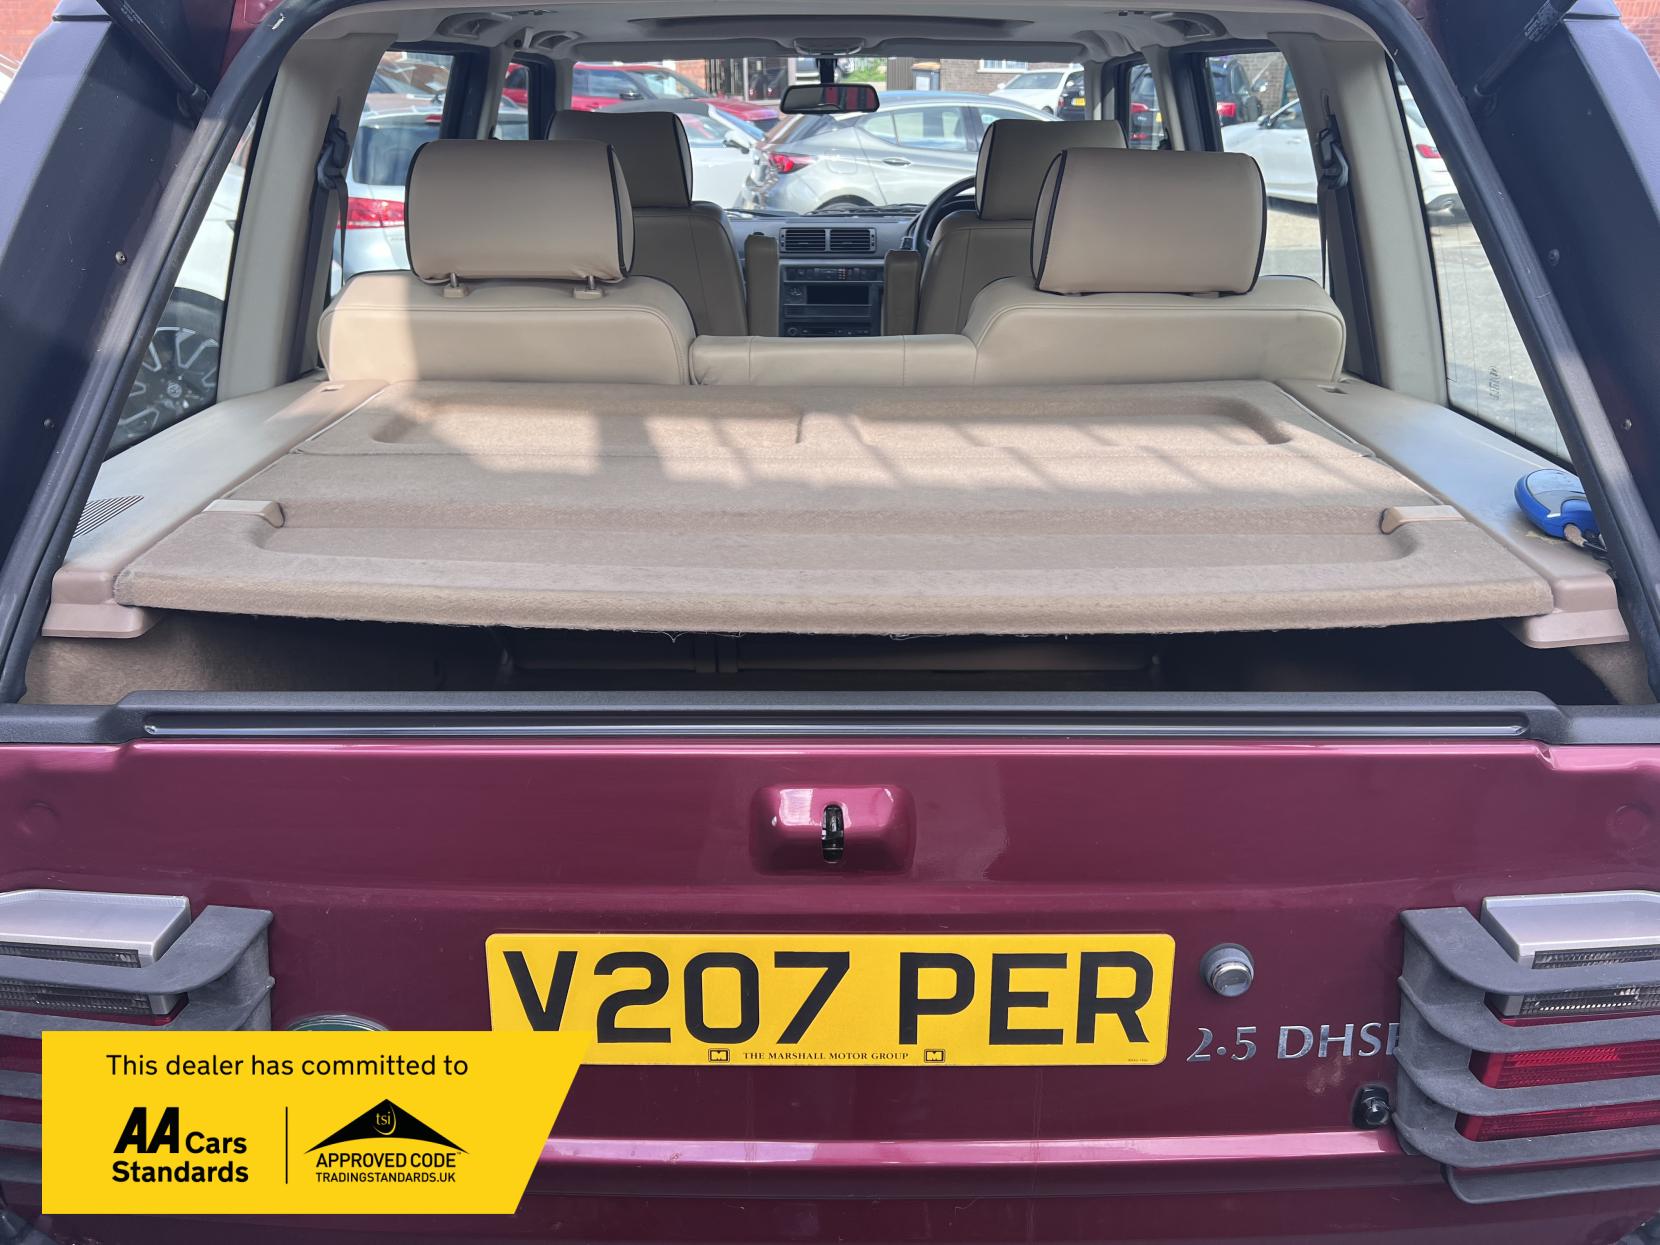 Land Rover Range Rover 2.5 TD HSE SUV 5dr Diesel Automatic (304 g/km, 137 bhp)